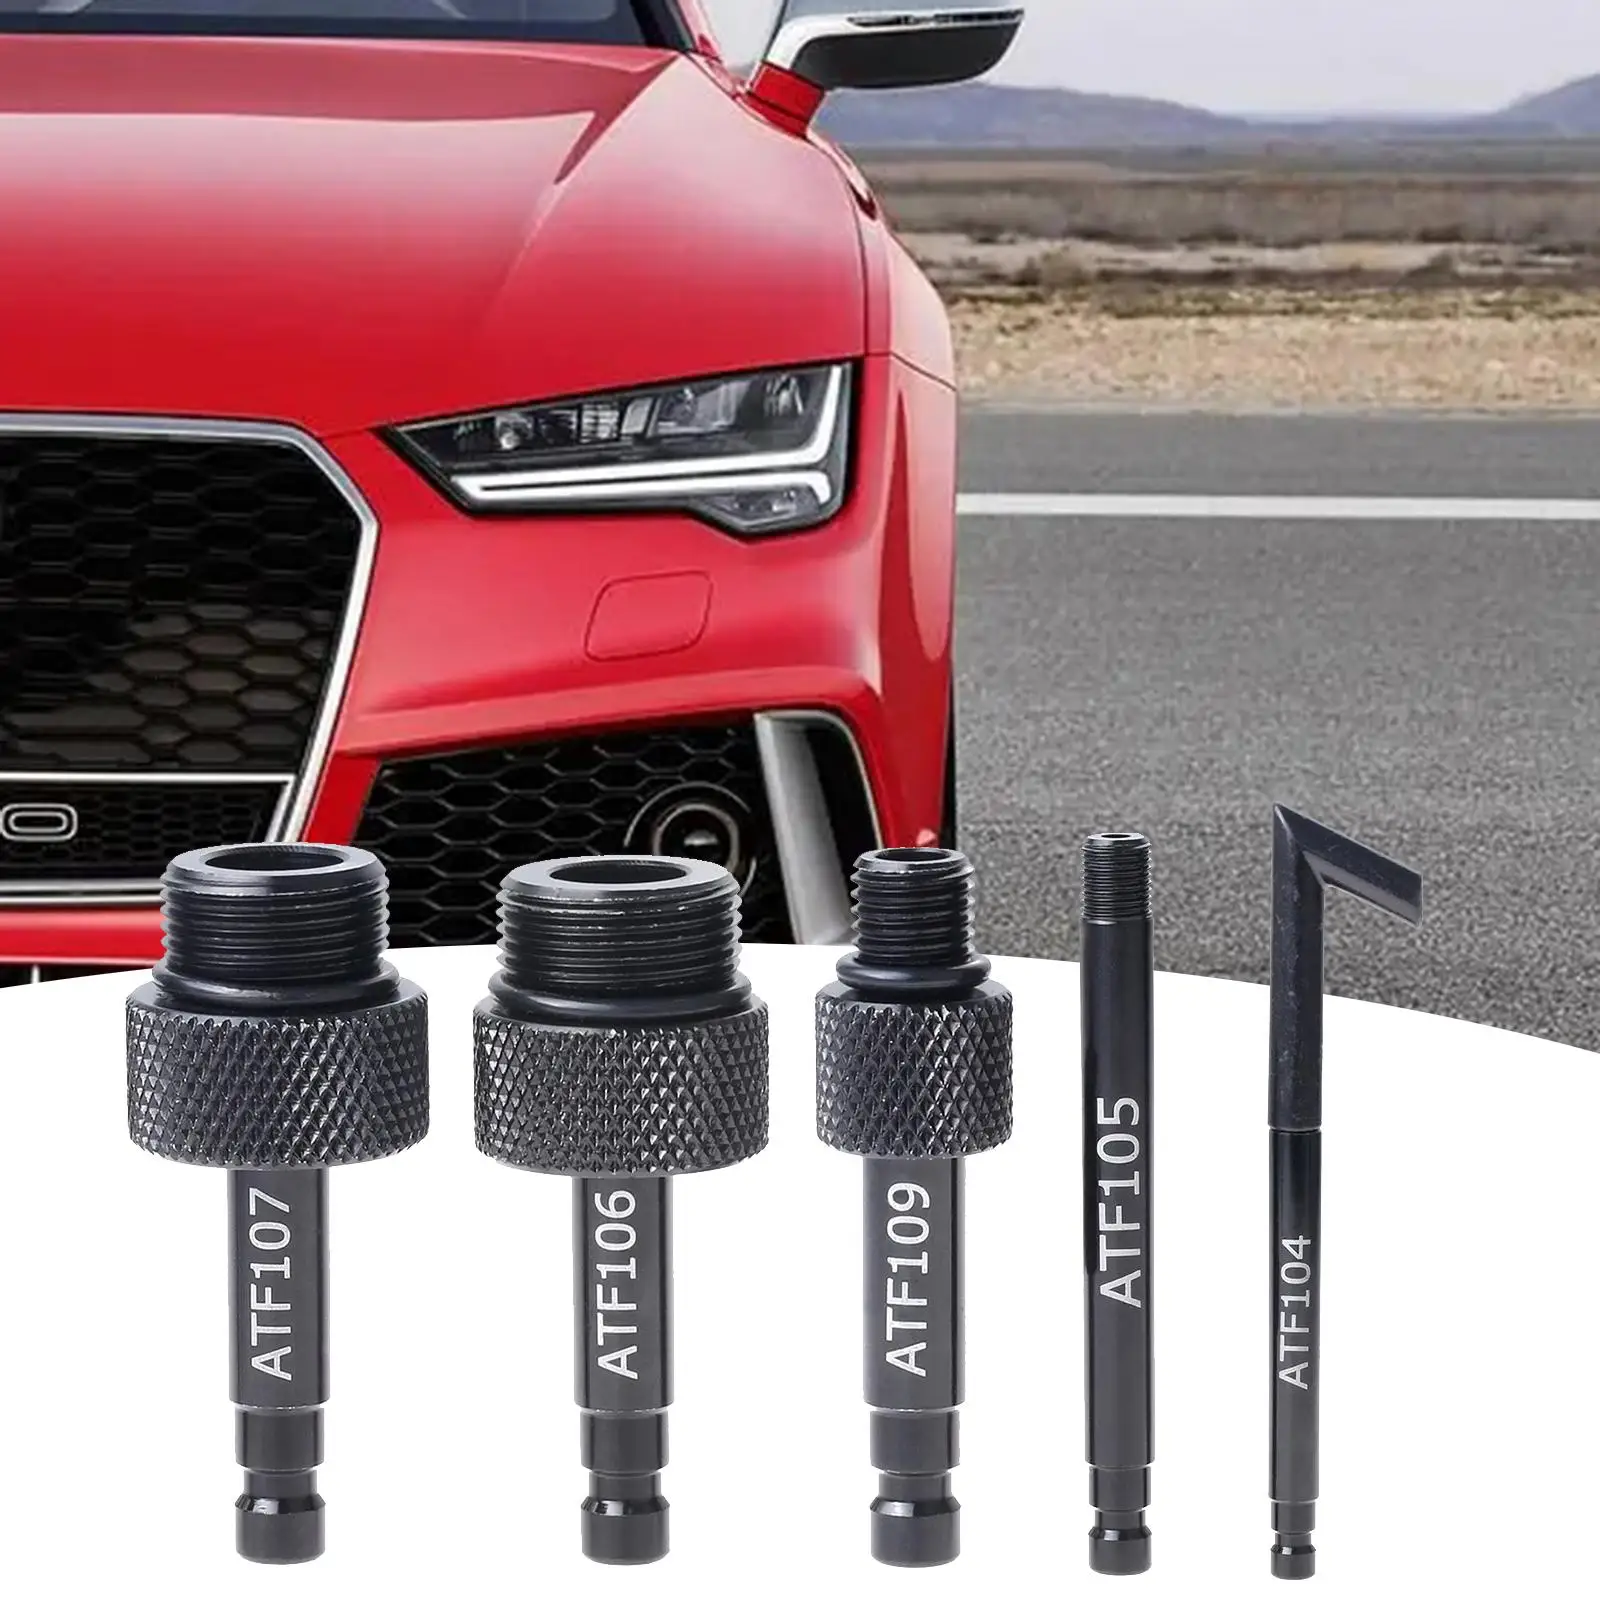 5x Transmission Automatic Fluid Oil Filling Filler Adapter for Audi Replace